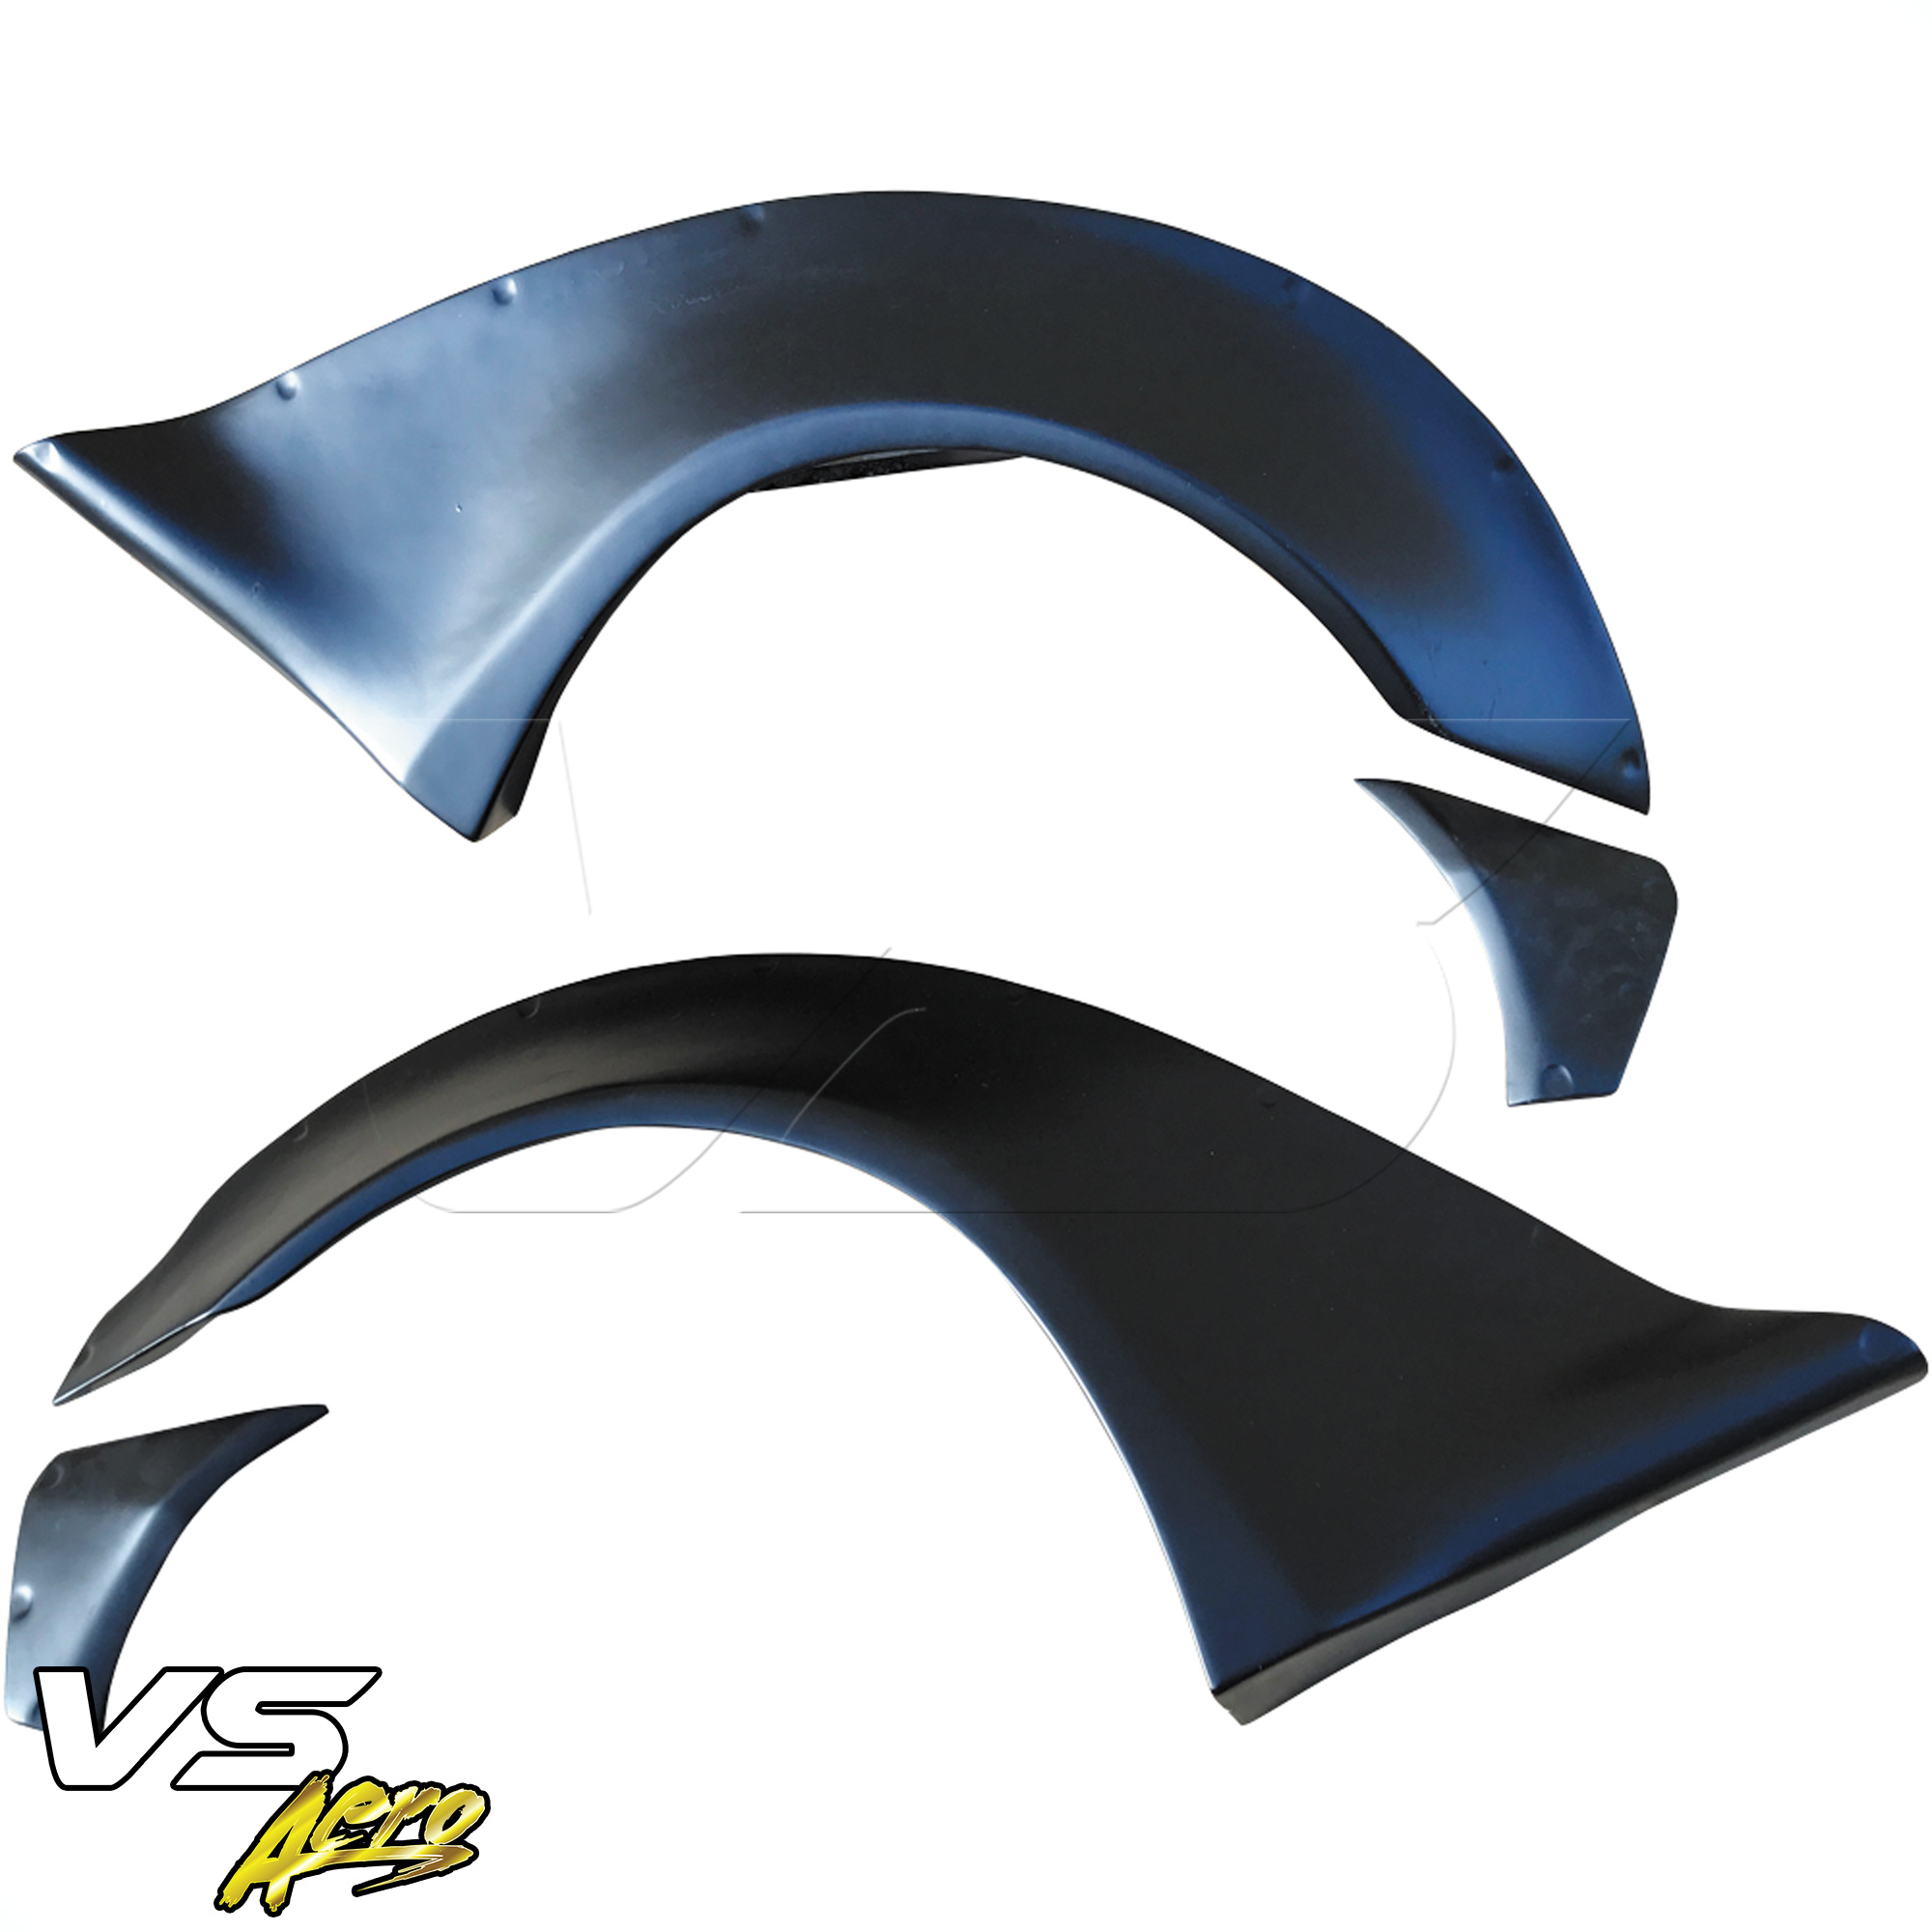 VSaero FRP LBPE Wide Body Fender Flares (rear) 4pc > Infiniti G37 Coupe 2008-2015 > 2dr Coupe - Image 8